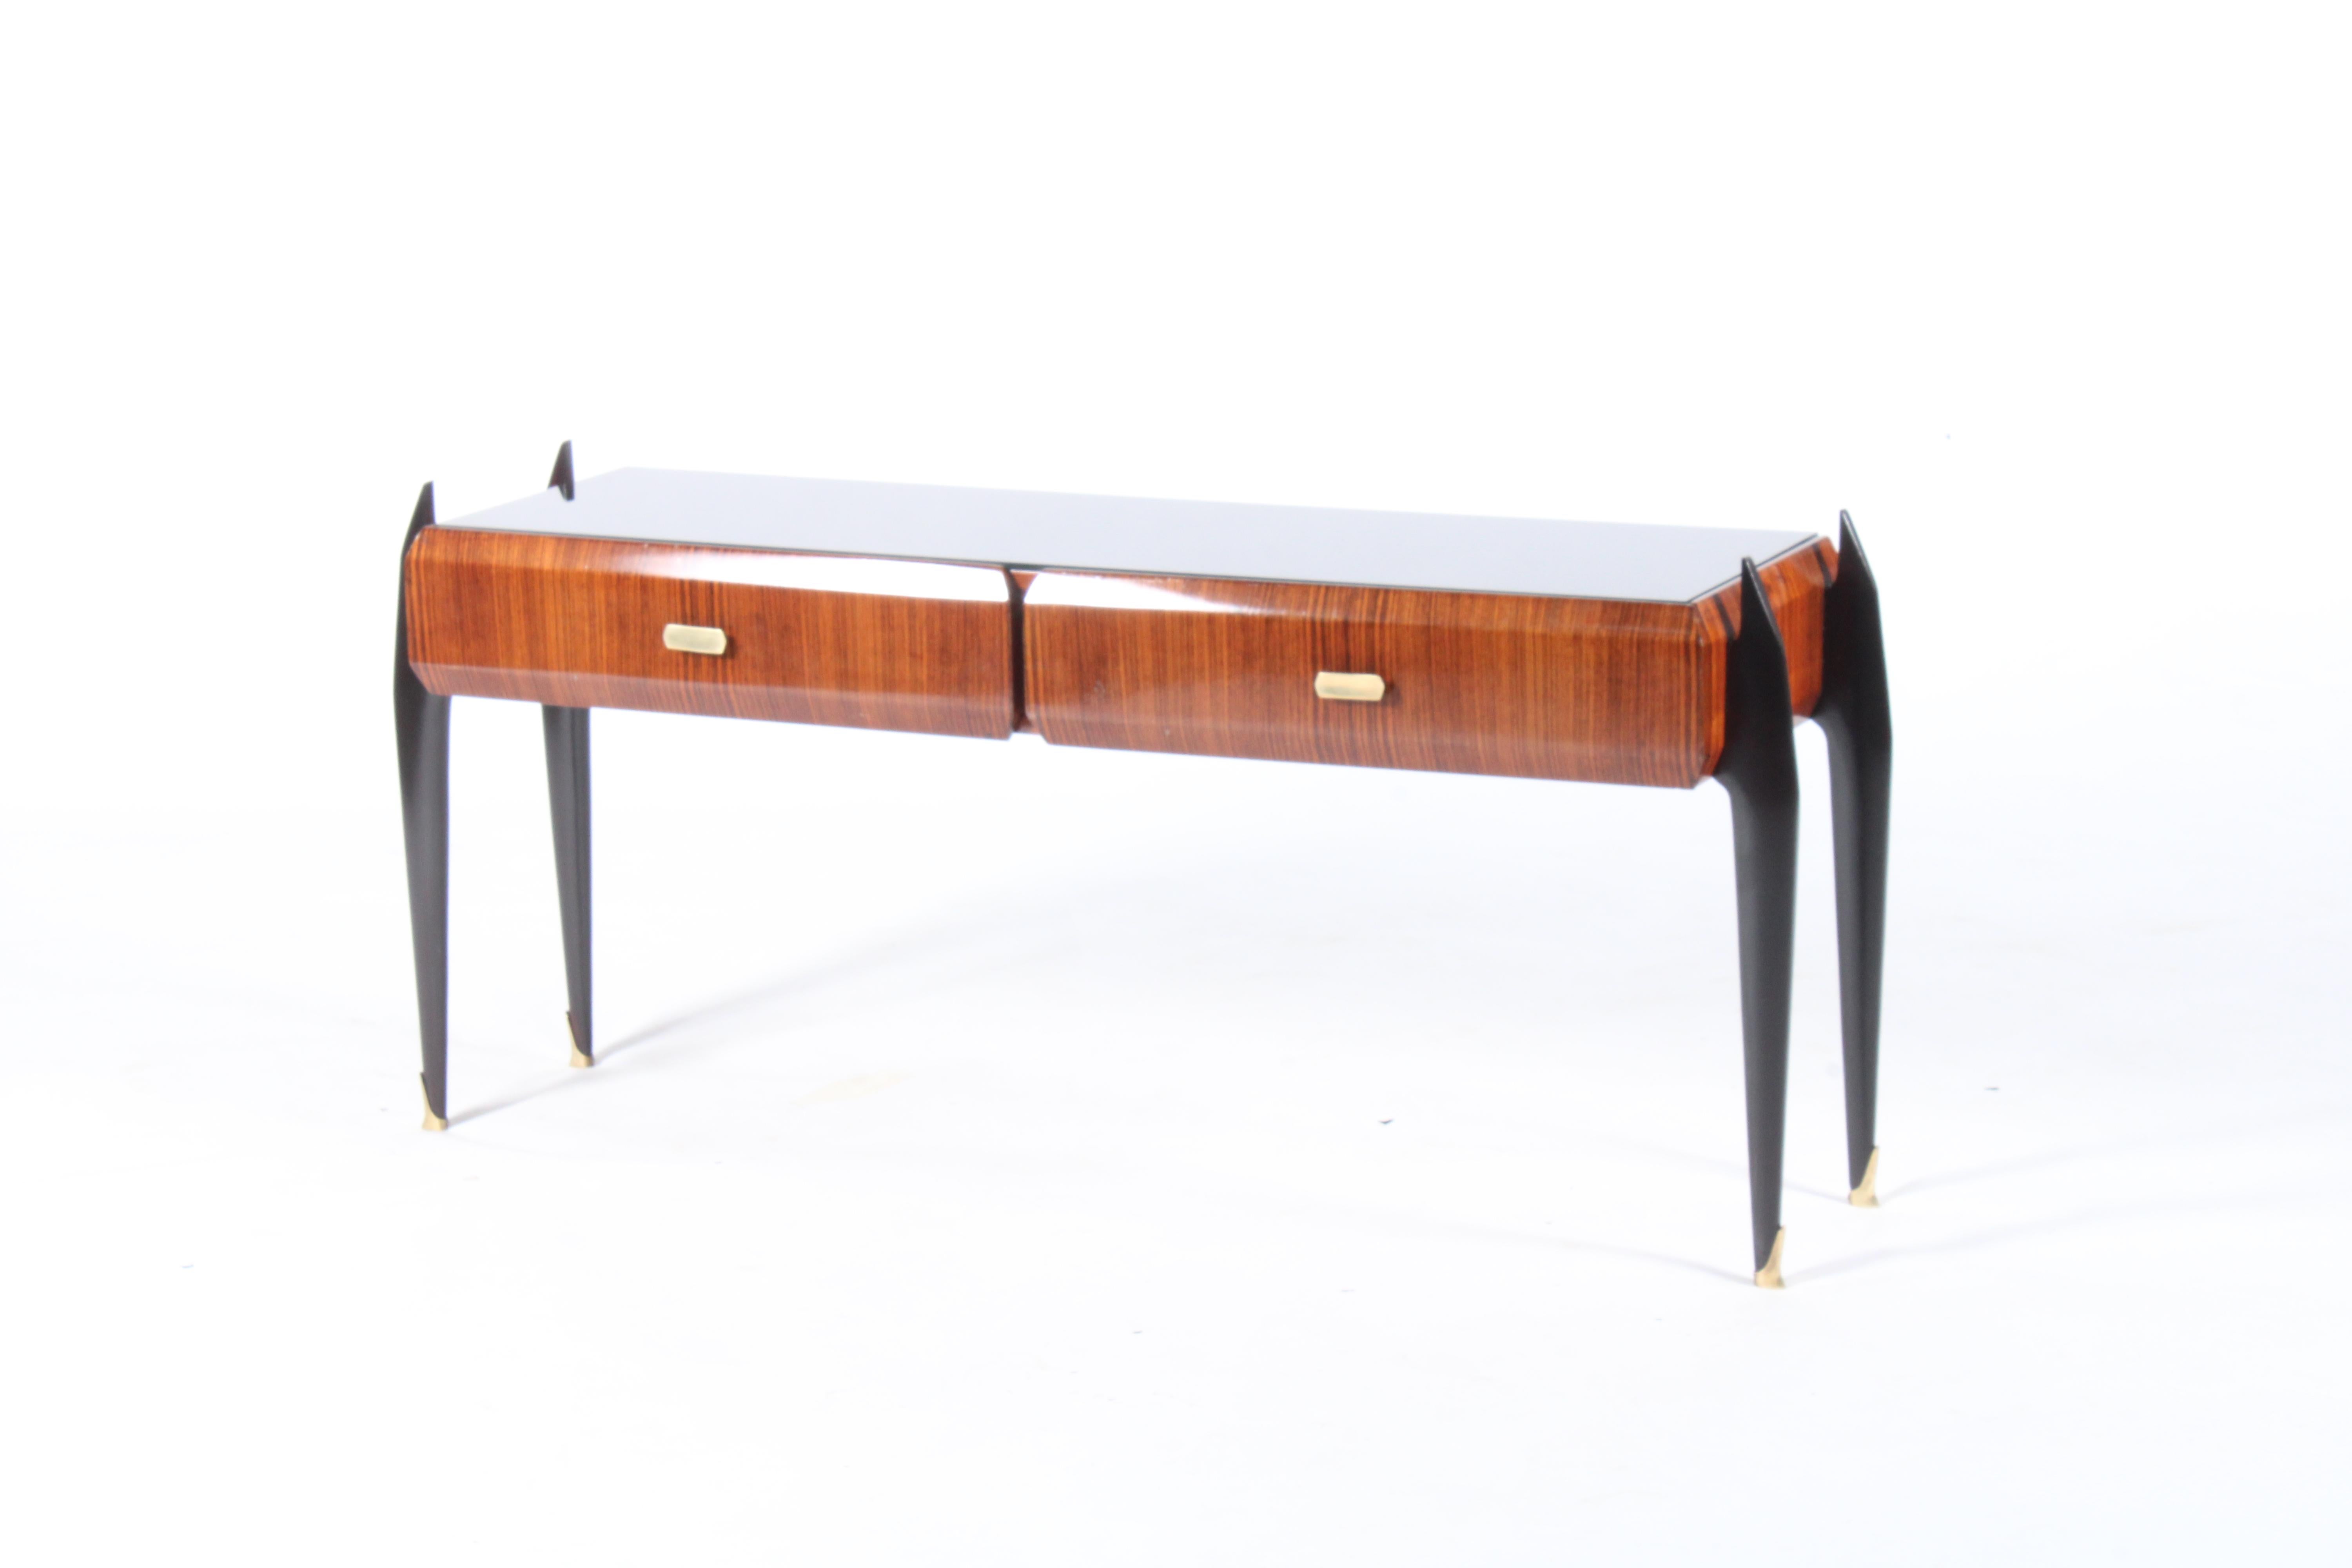 This striking original piece dating from the 1950's works wonderfully well as a low console table but in our opinion could easily double up as a TV stand or media unit. Sourced in the beautiful city of Turin from a private home we have replaced the